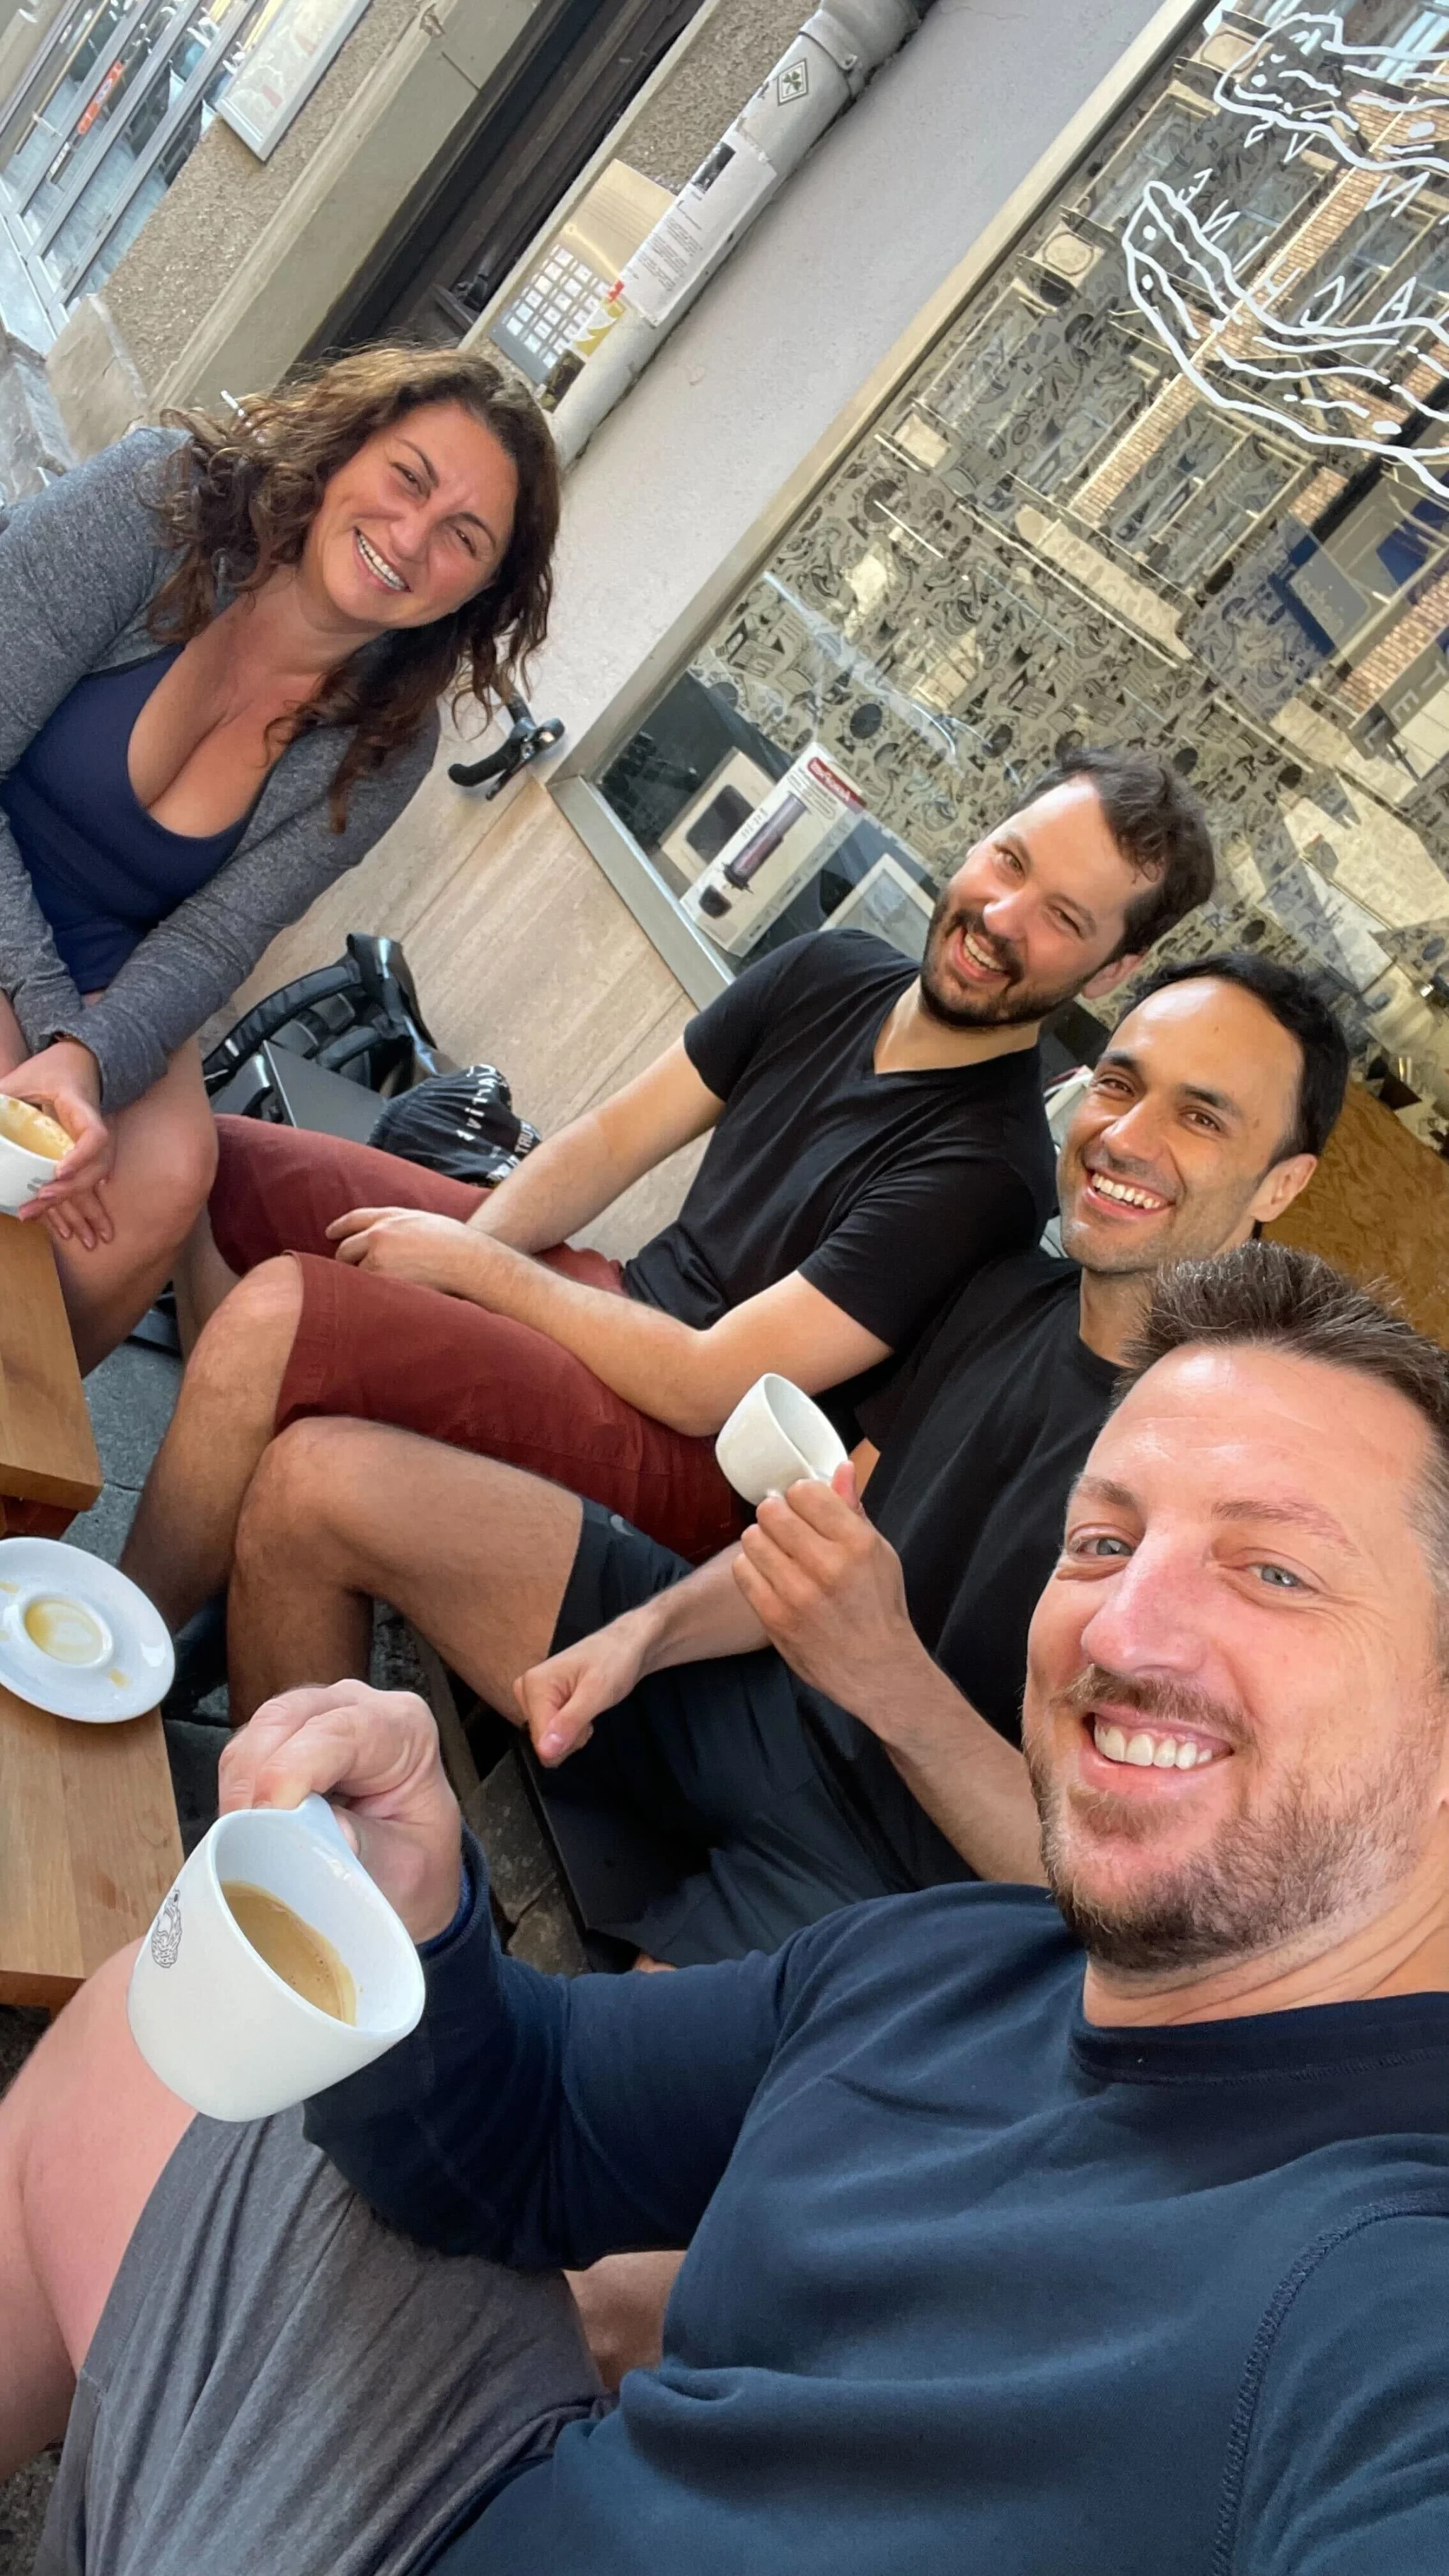 Justin enjoying coffee with some colleagues.